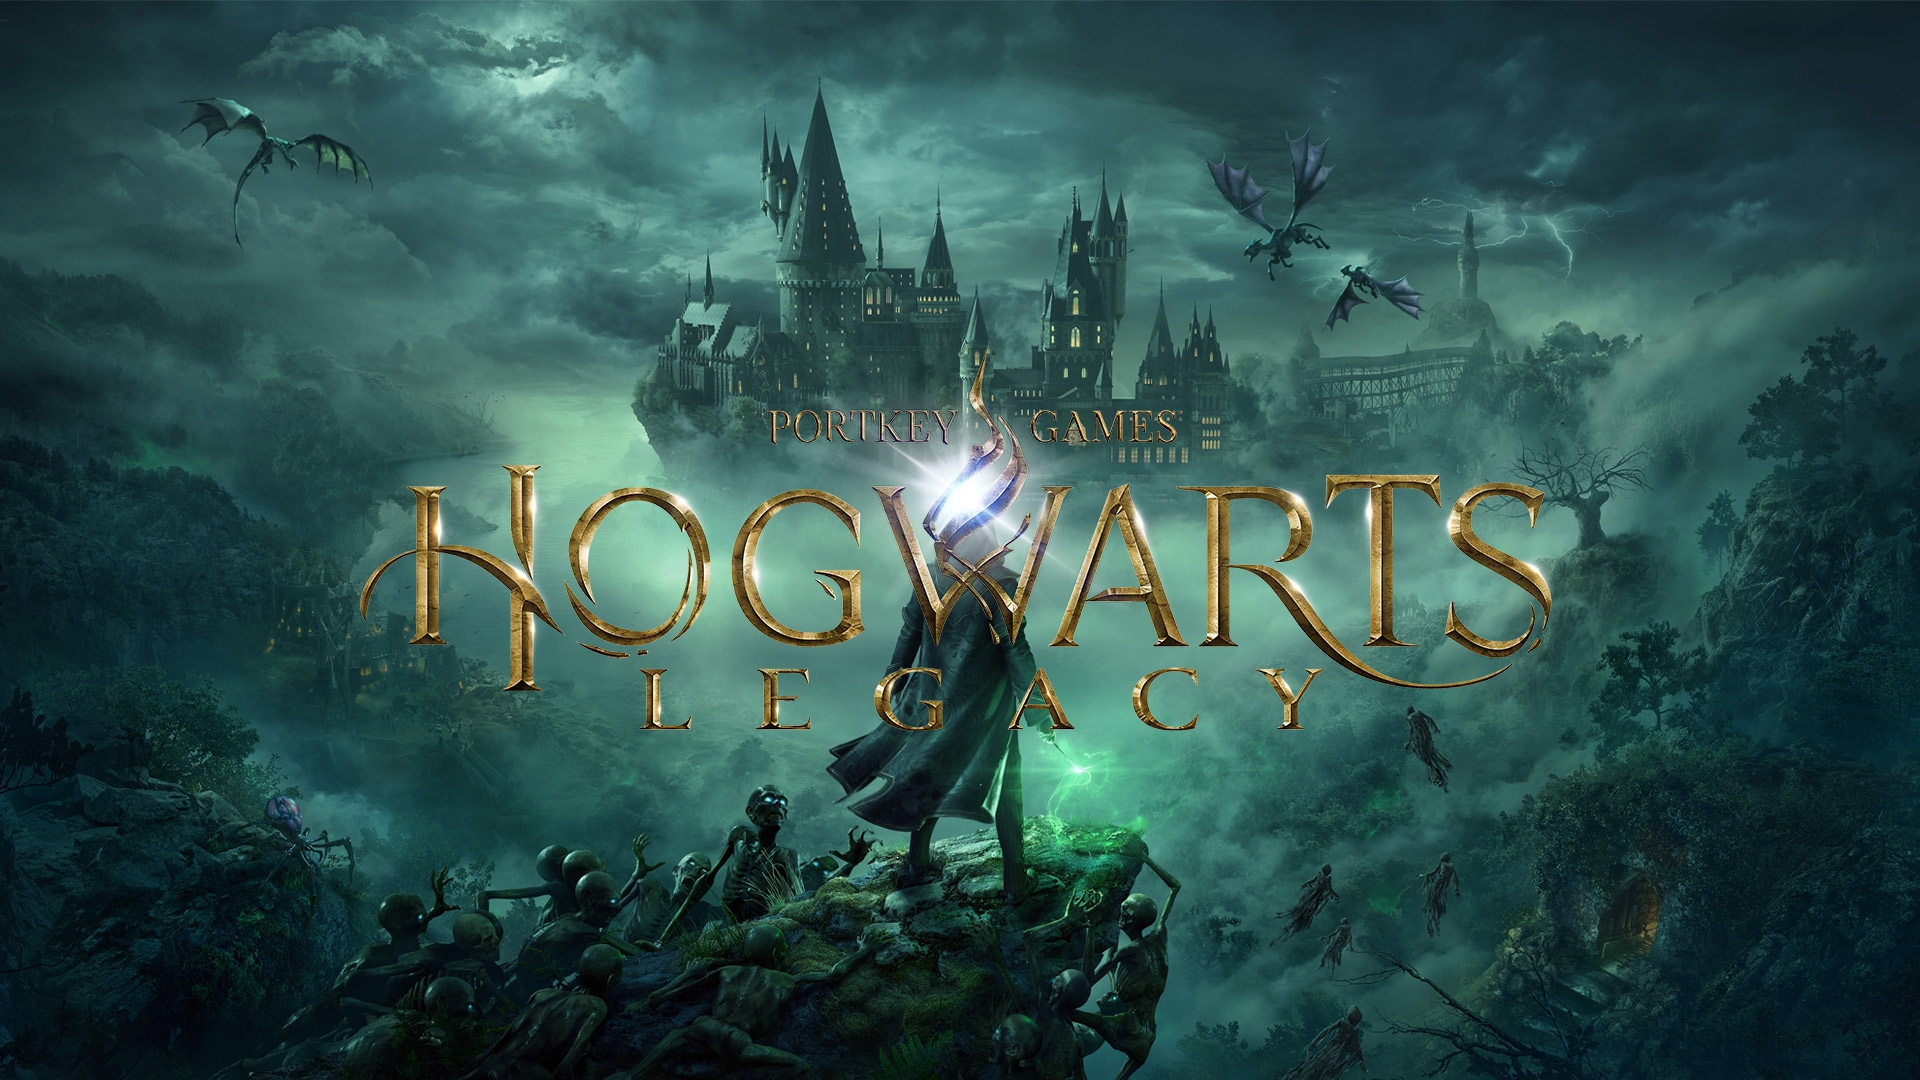 Hogwarts Legacy player count on PC almost enough to claim Steam